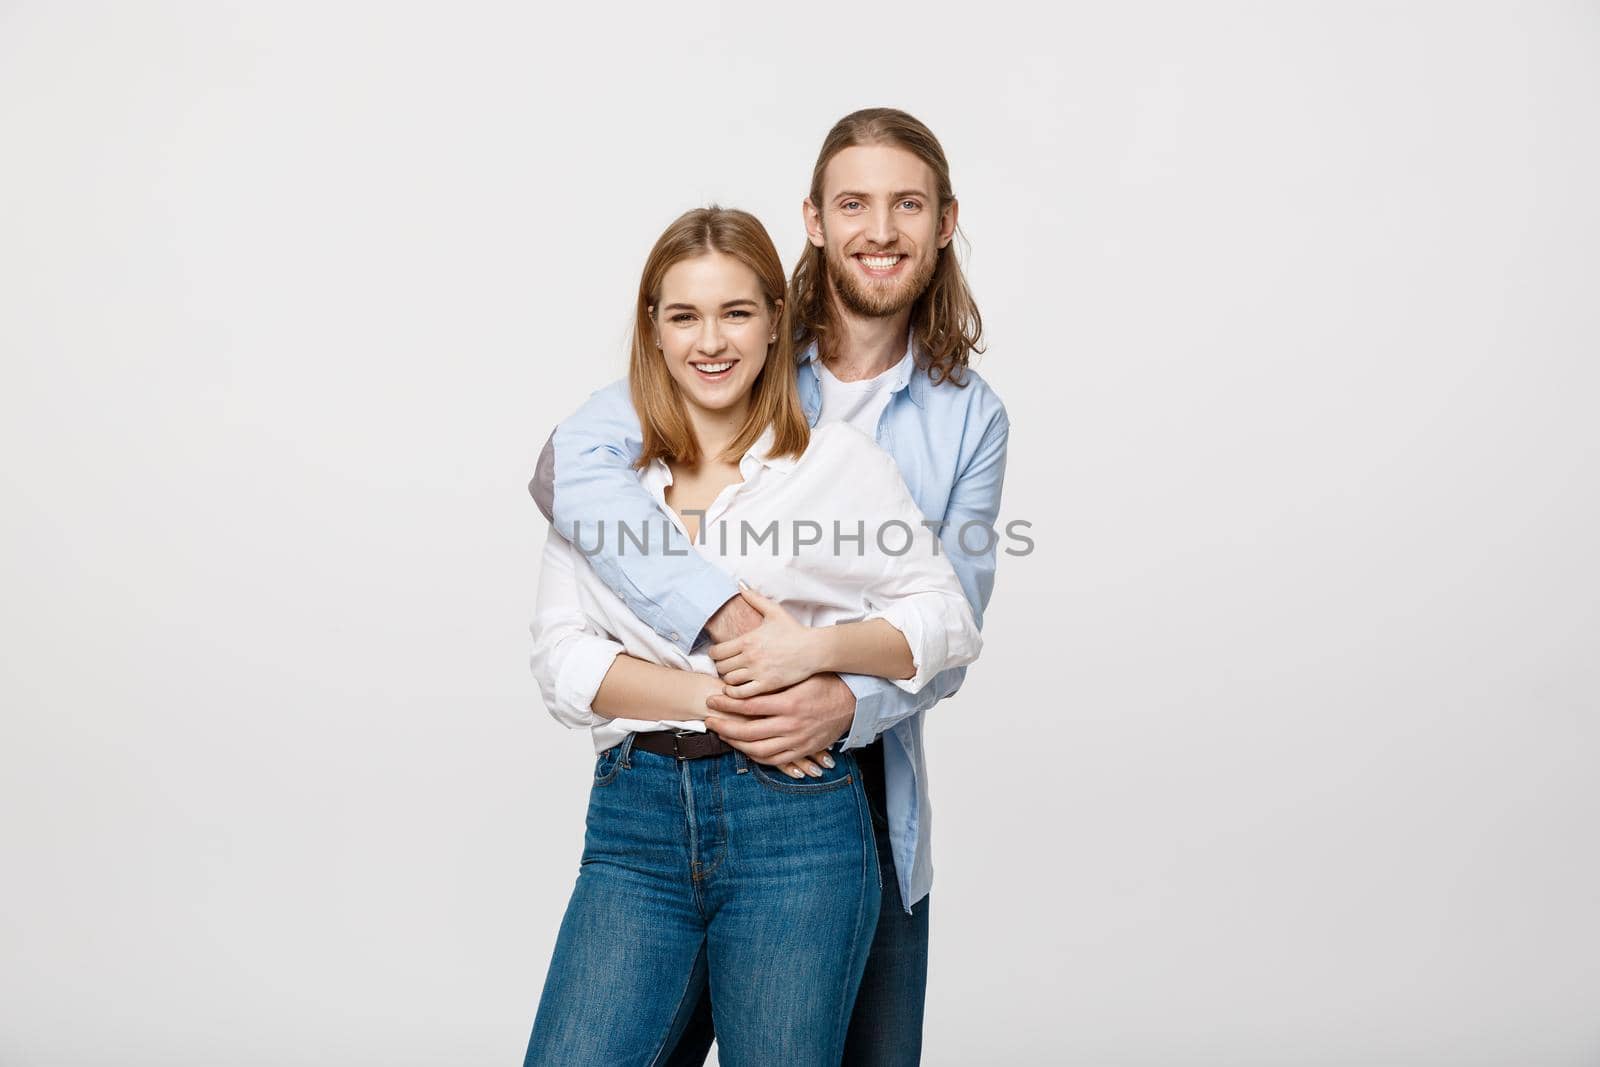 Portrait of cheerful young couple standing and hugging each other on isolated white background.